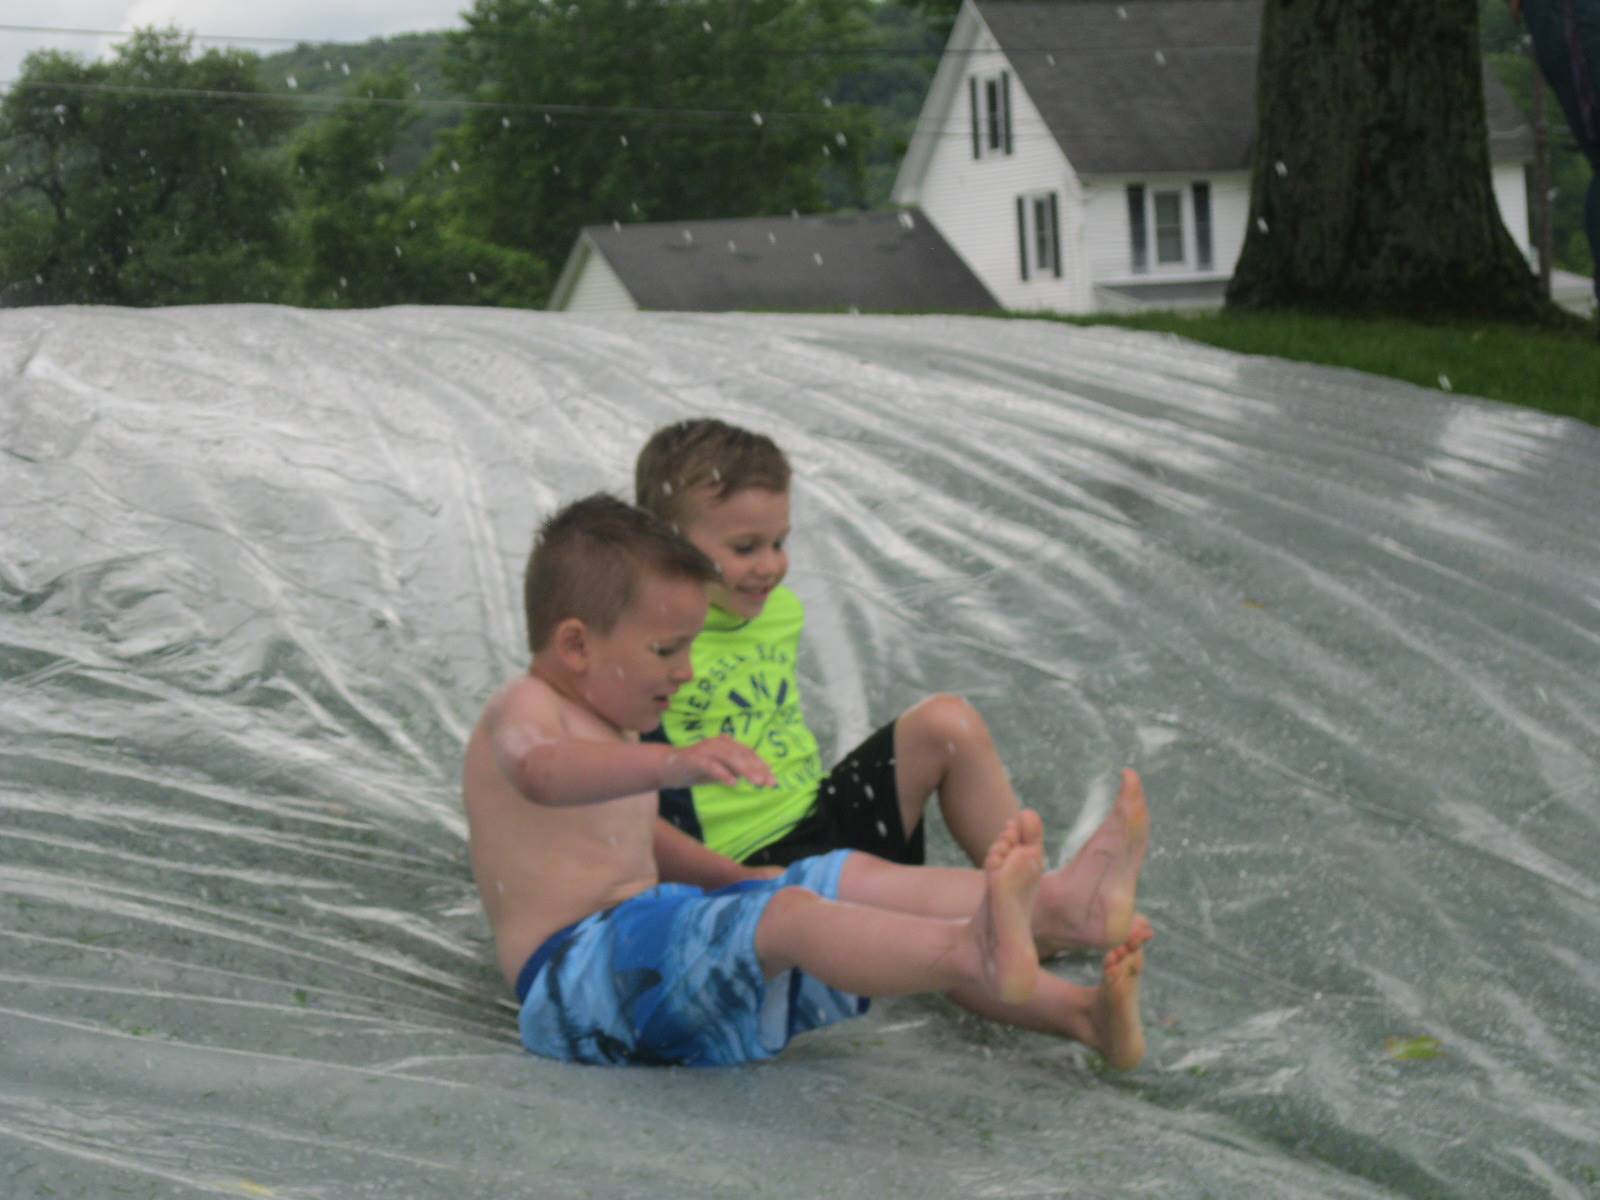 2 students on water slide